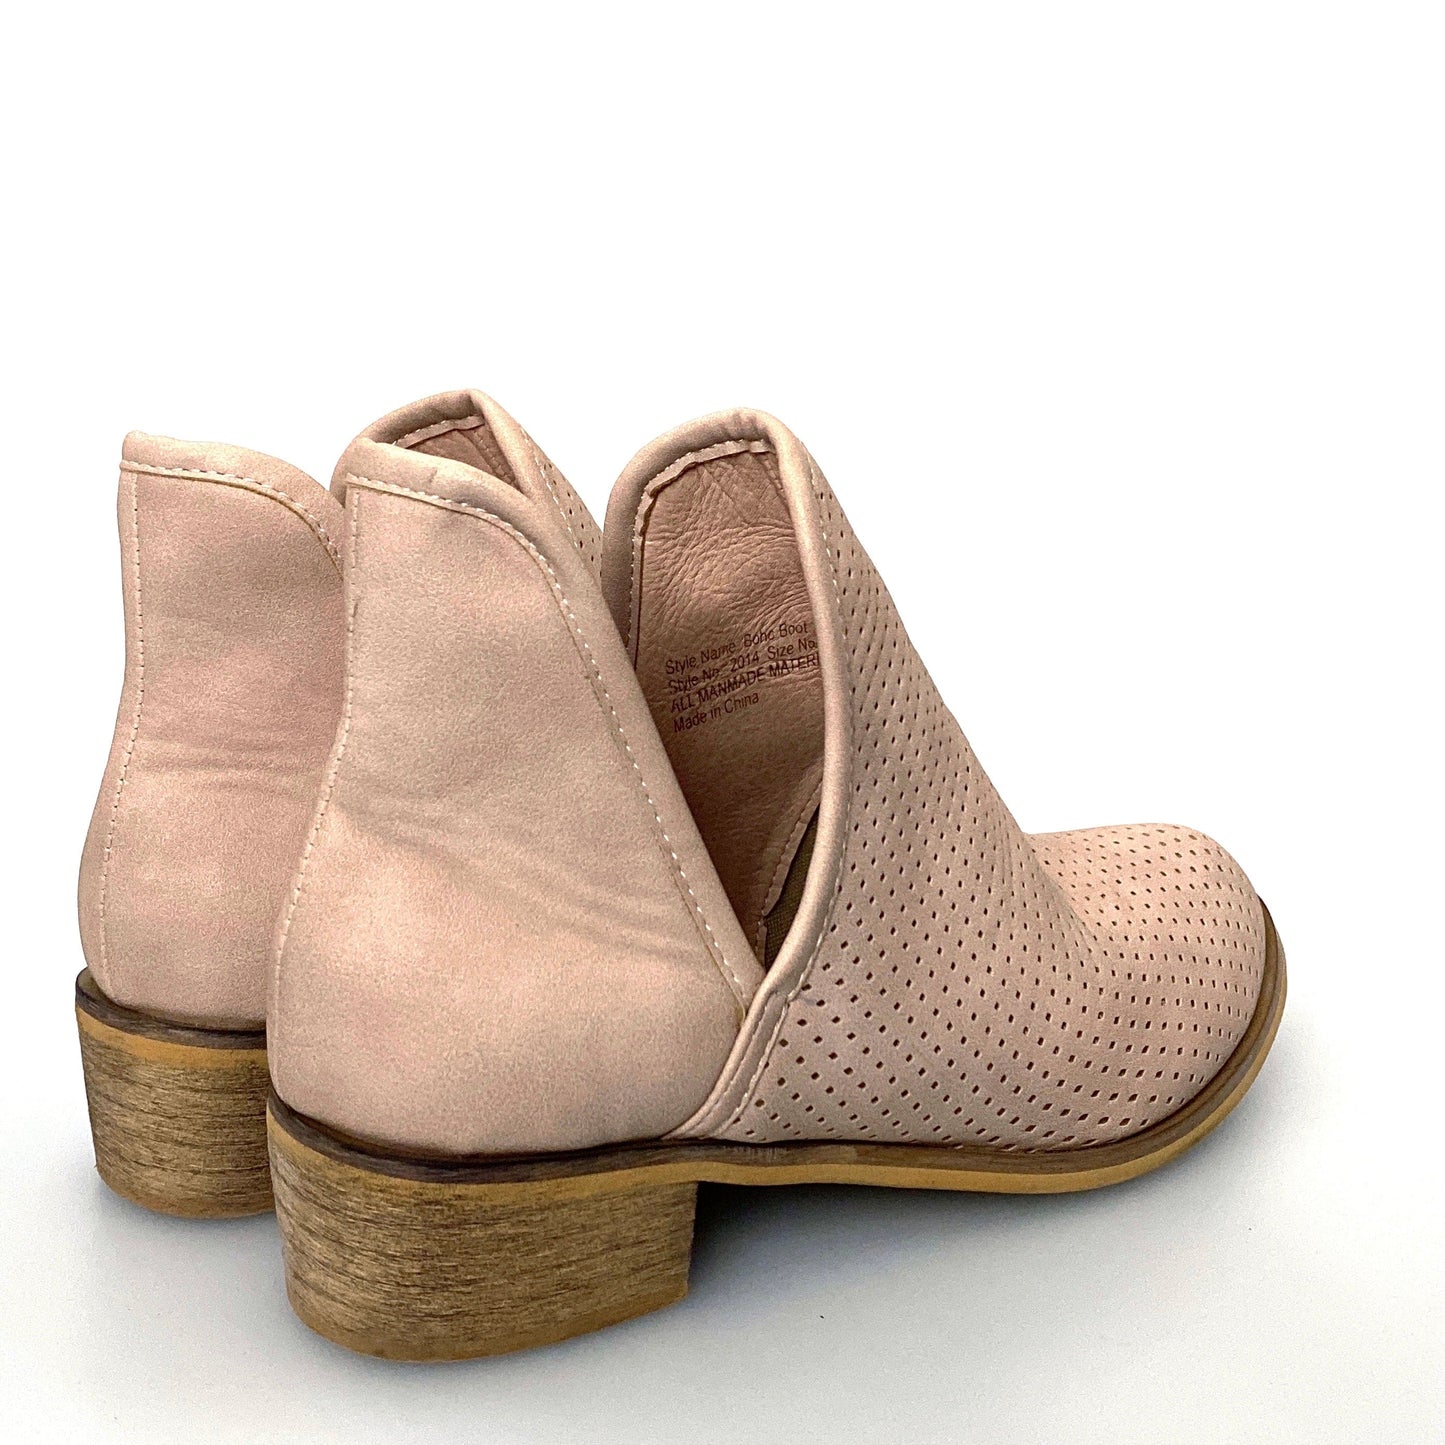 Seven Seven7 Womens Size 11 Blush Pink Booties Boots Boho Peforated